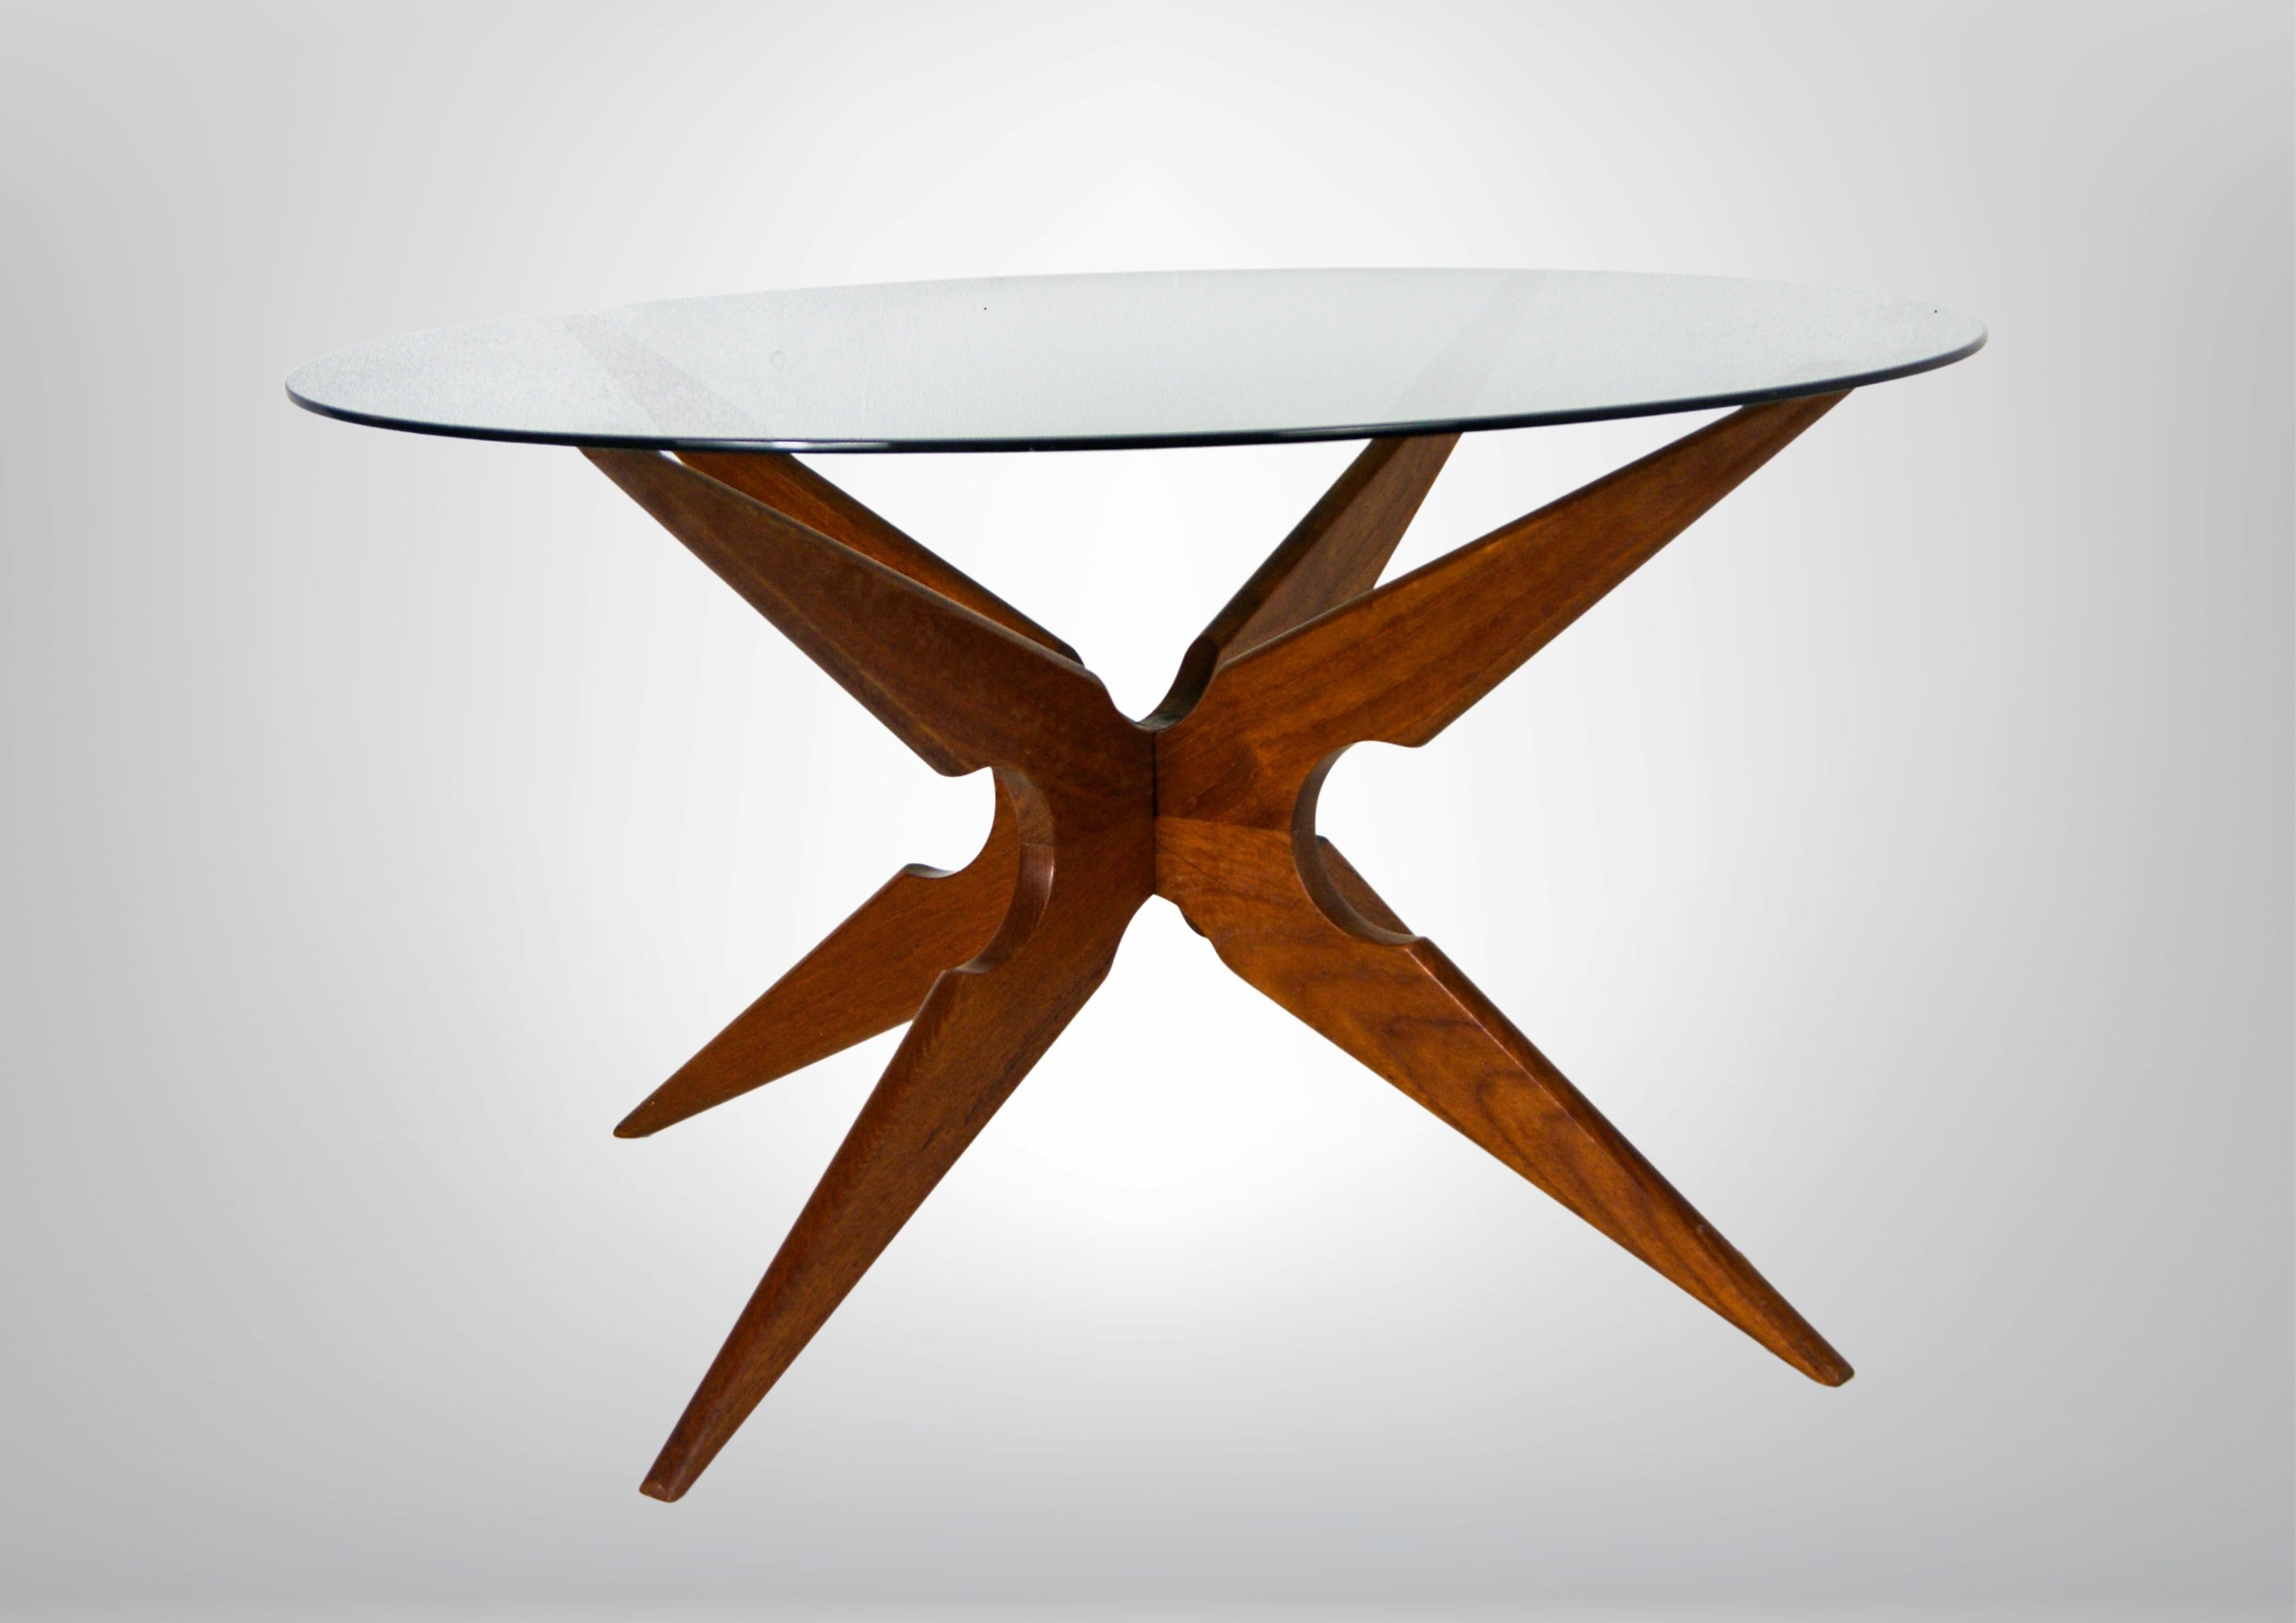 Mid-Century Teak and Smoked glass coffee table by Sika Mobler Denmark, circa 1960s.
Whilst under the helm of Ankjær Andreasen, Sika Mobler introduced smaller gift items and household furniture made of Danish teak to its range in the early 1960s.